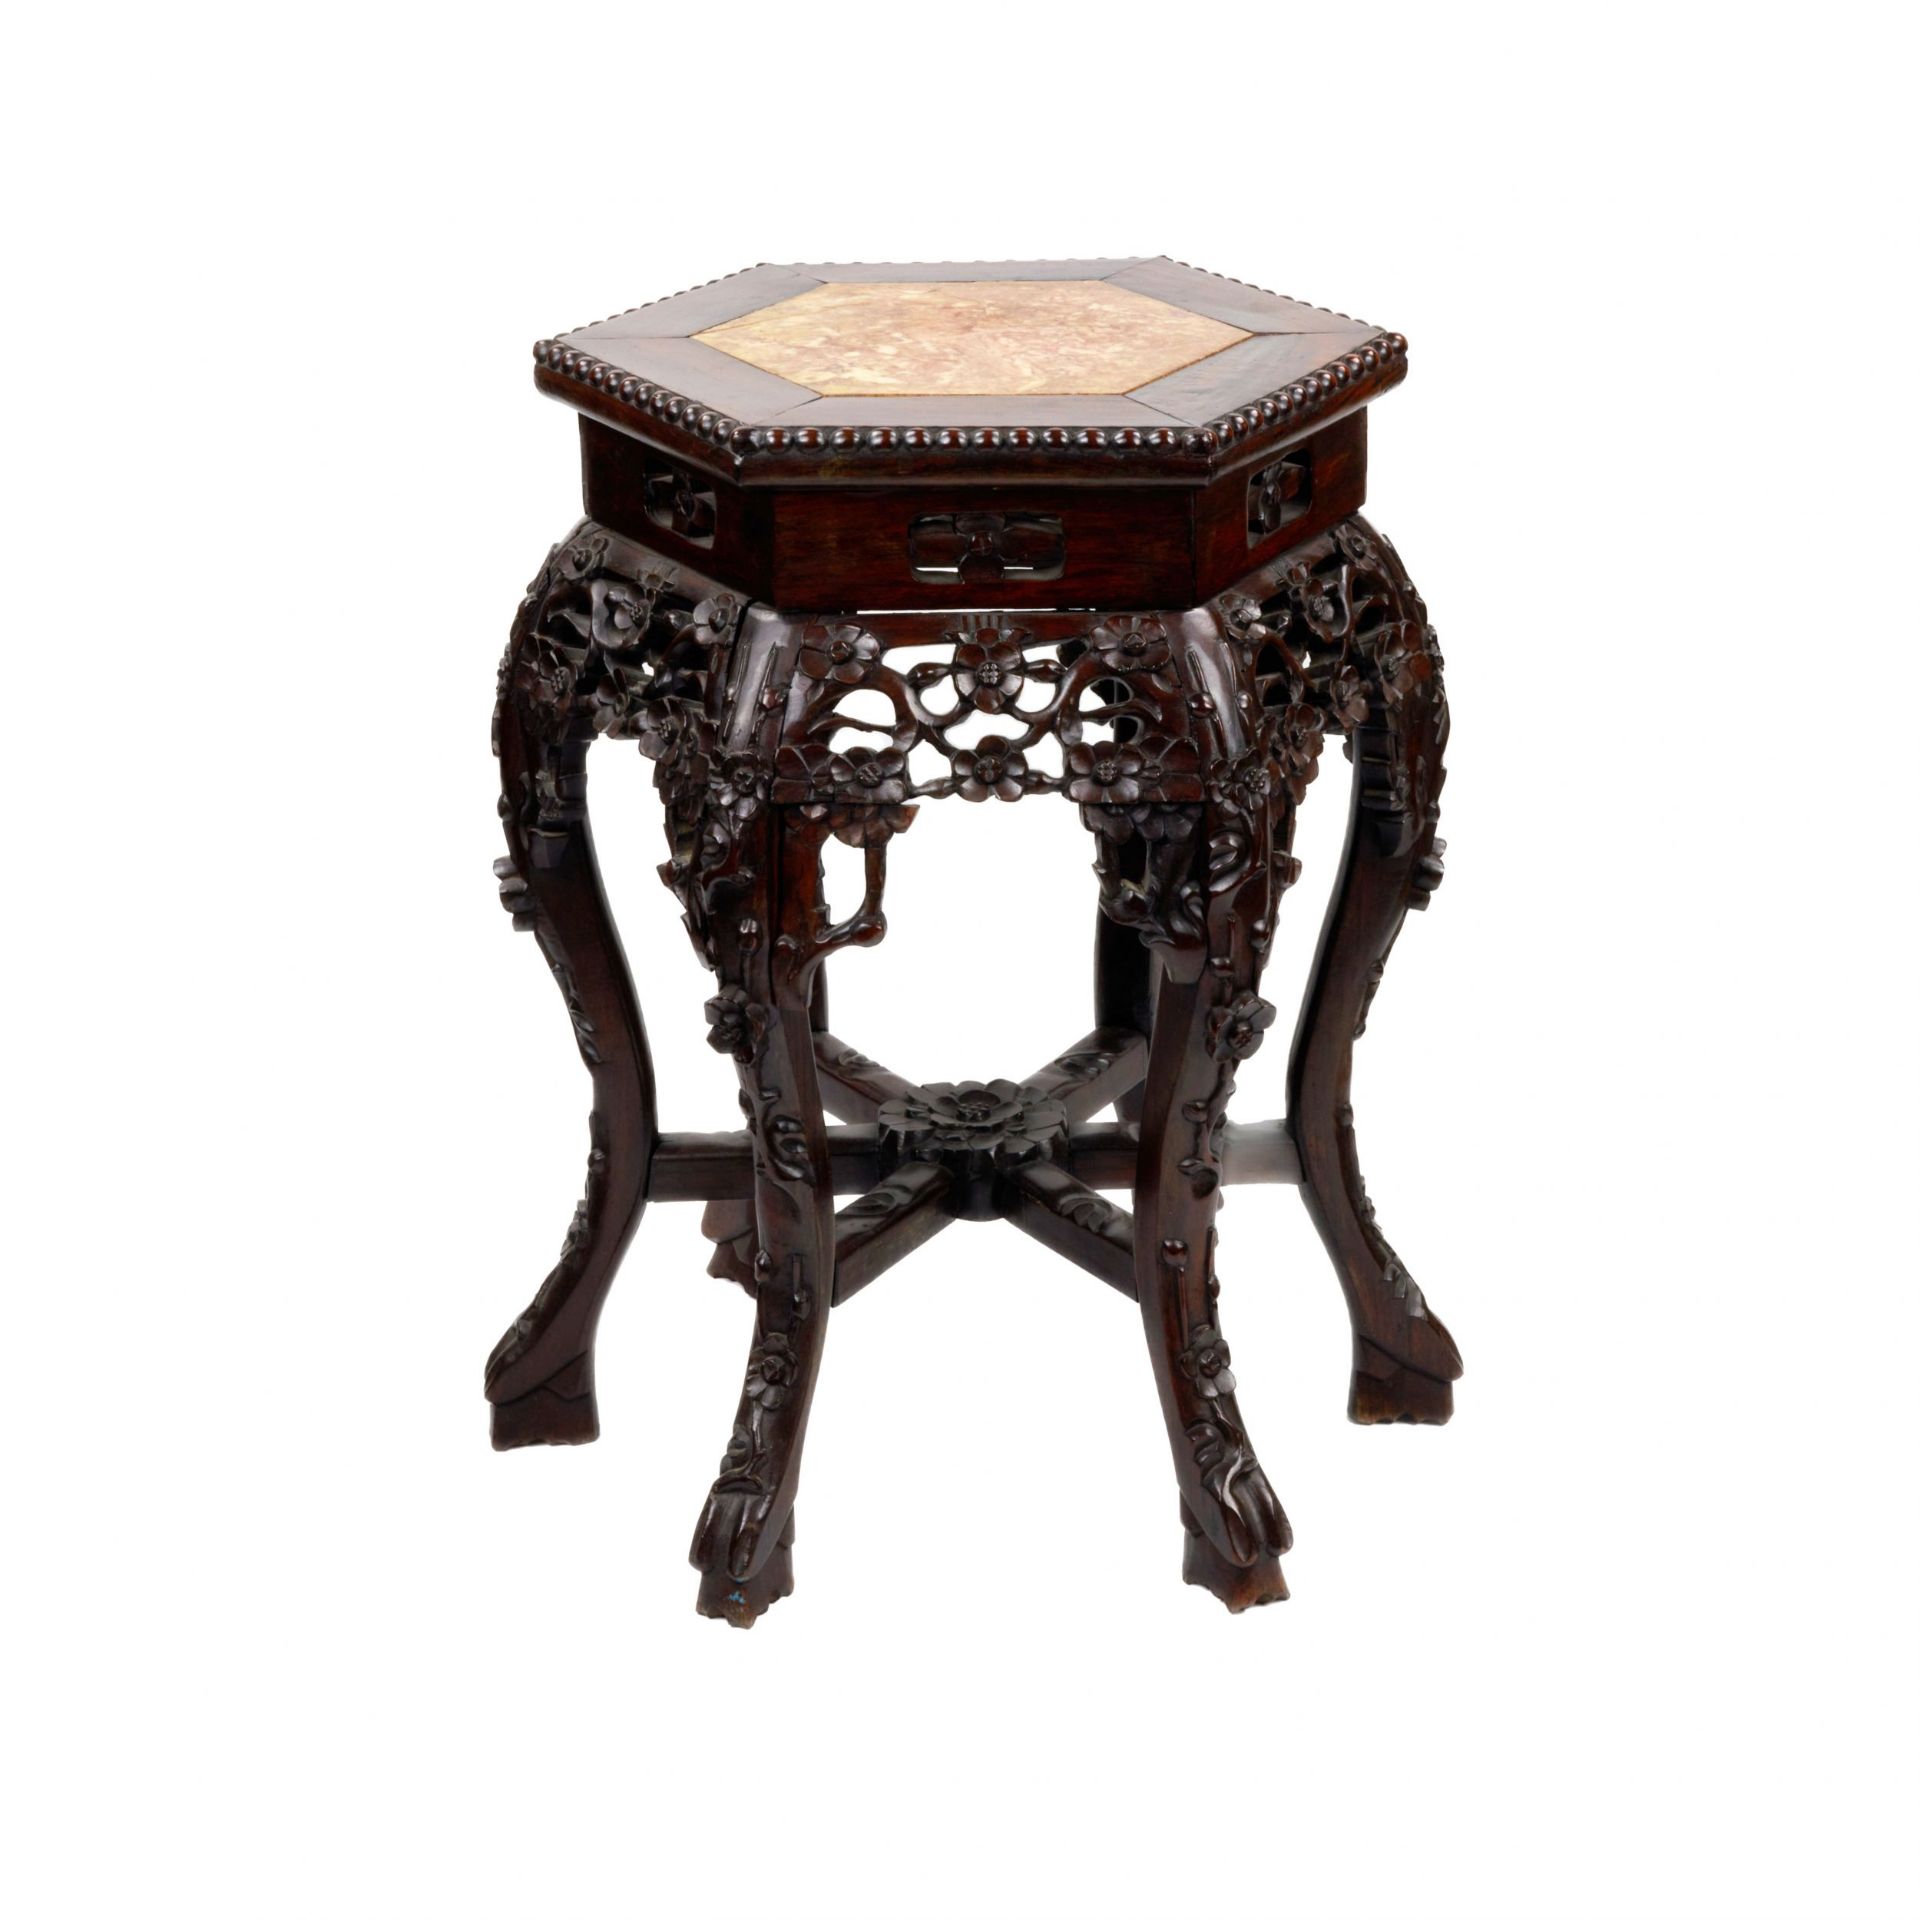 Carved, Chinese stand for a vase, mahogany with marble. - Image 2 of 4